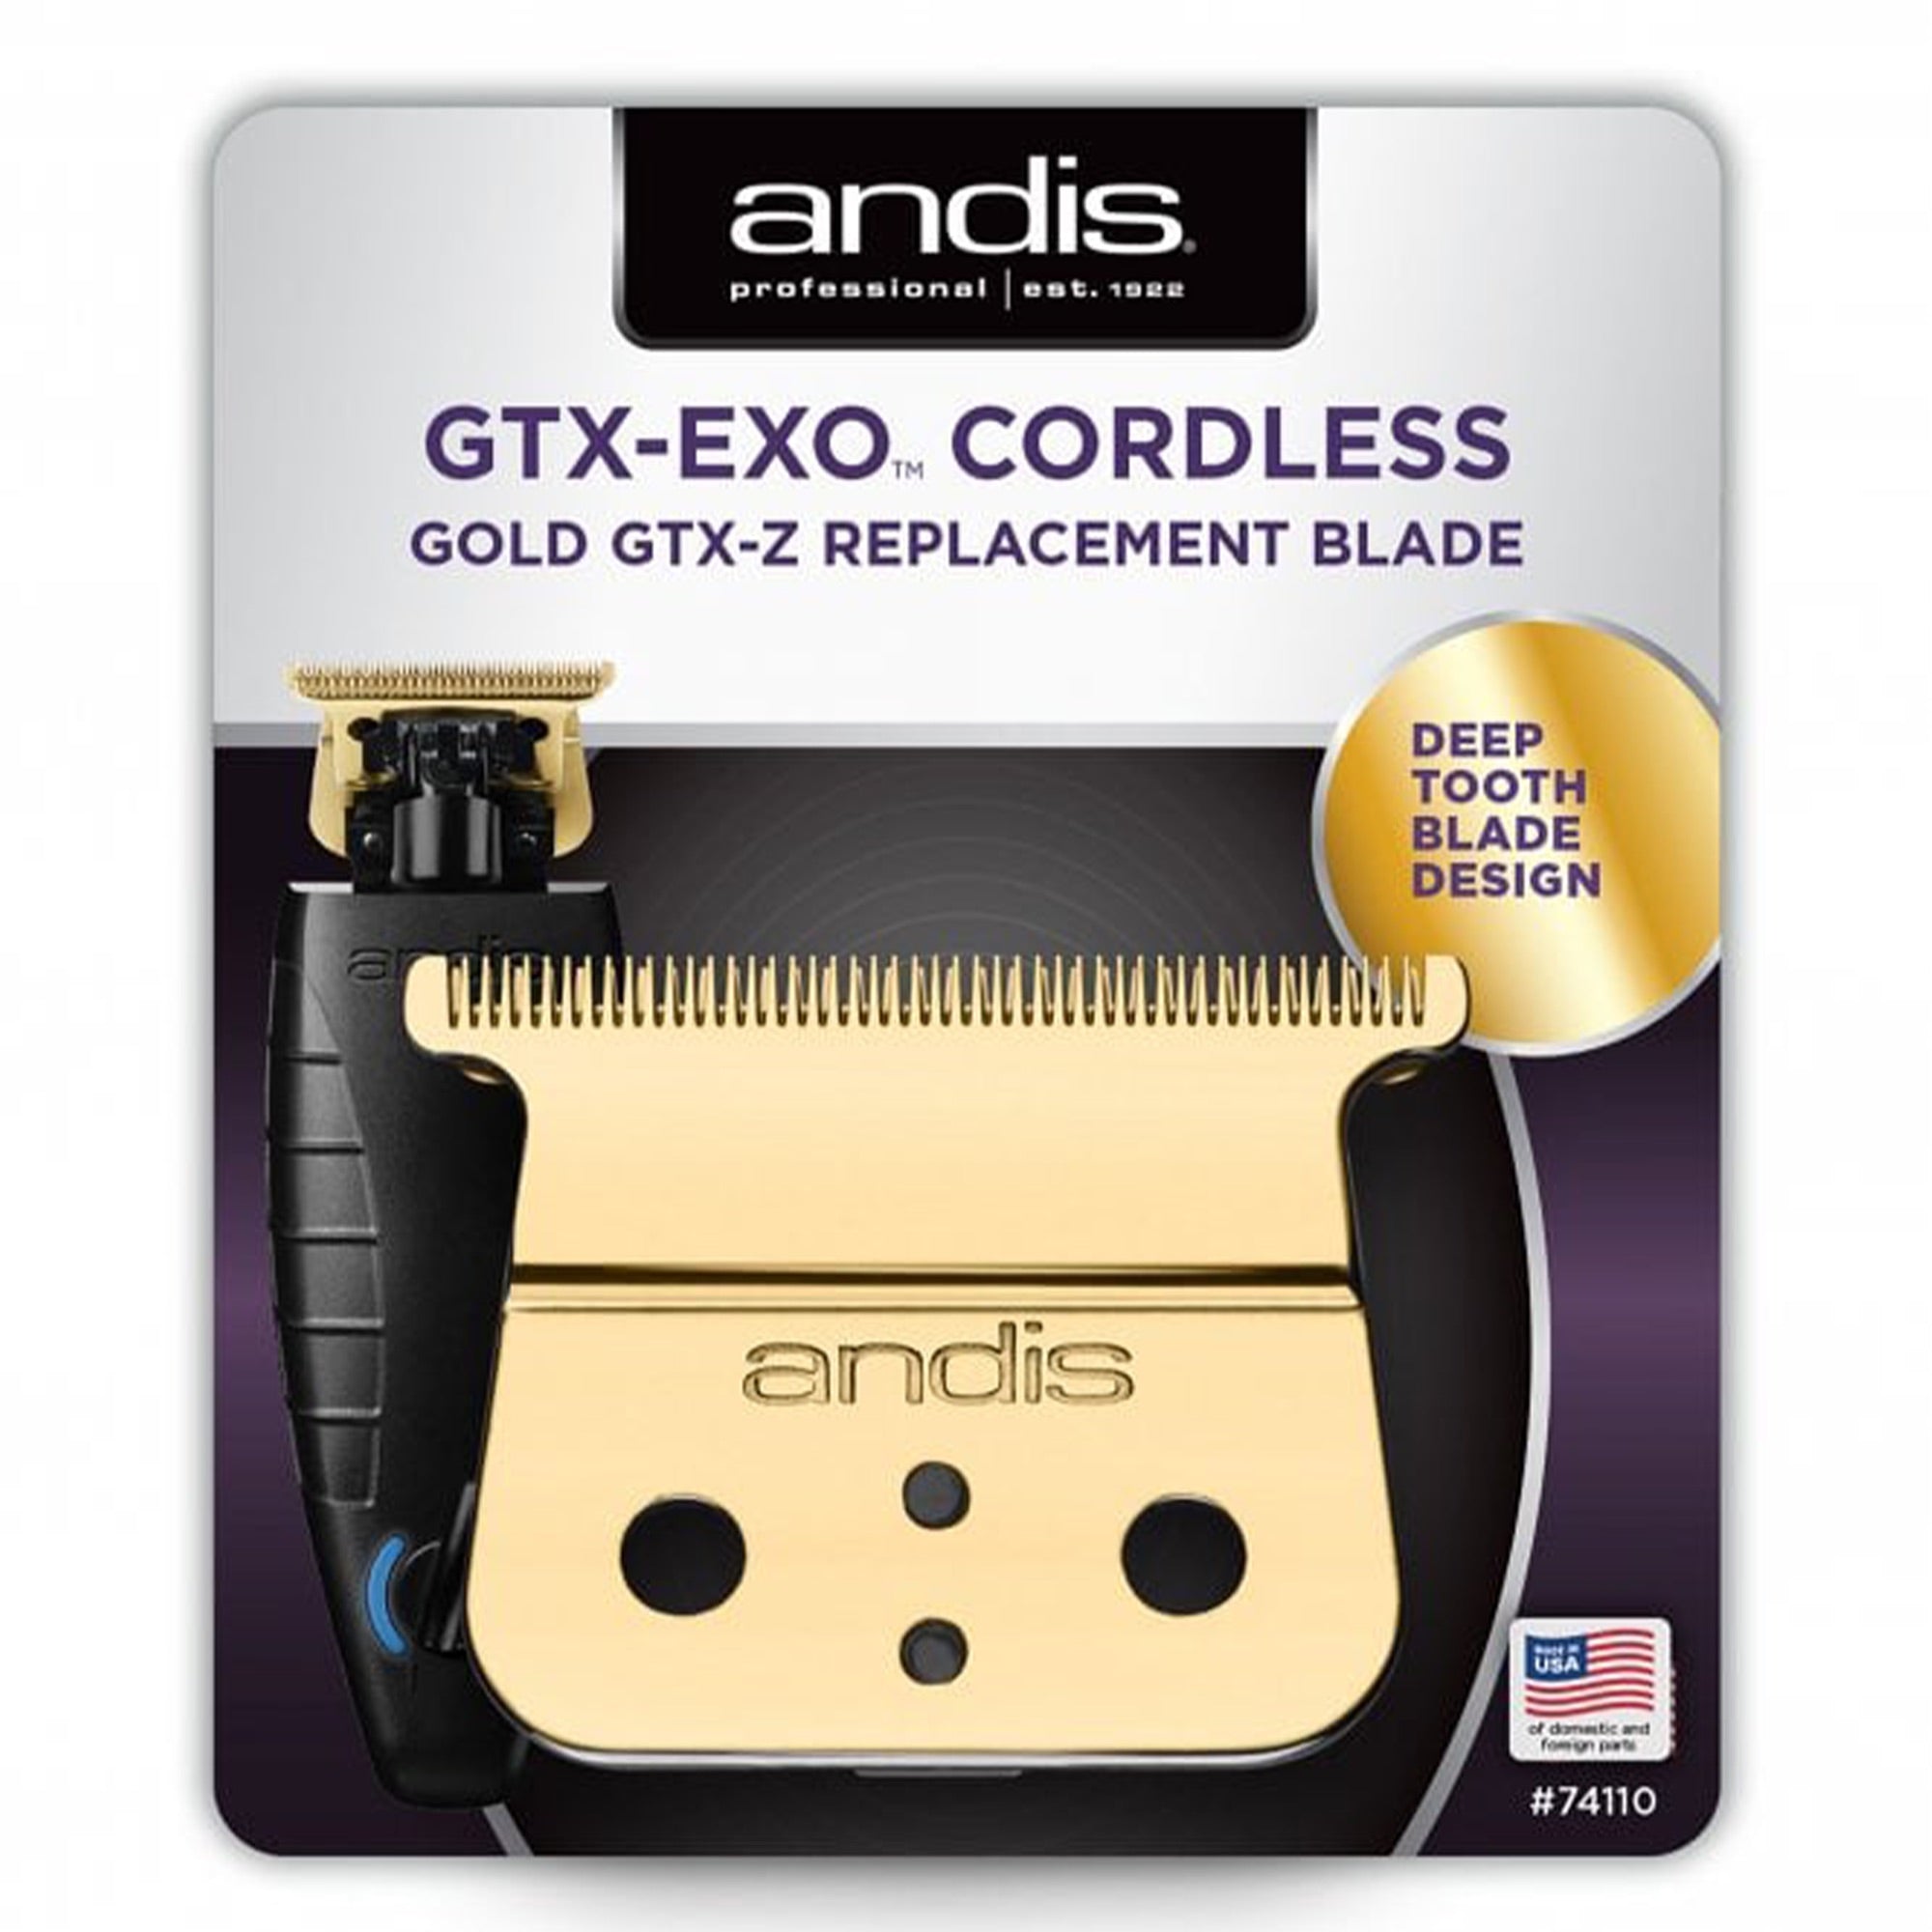 Andis - GTX EXO Cordless Gold GTX Z Replacement Blade #74110 - Eson Direct